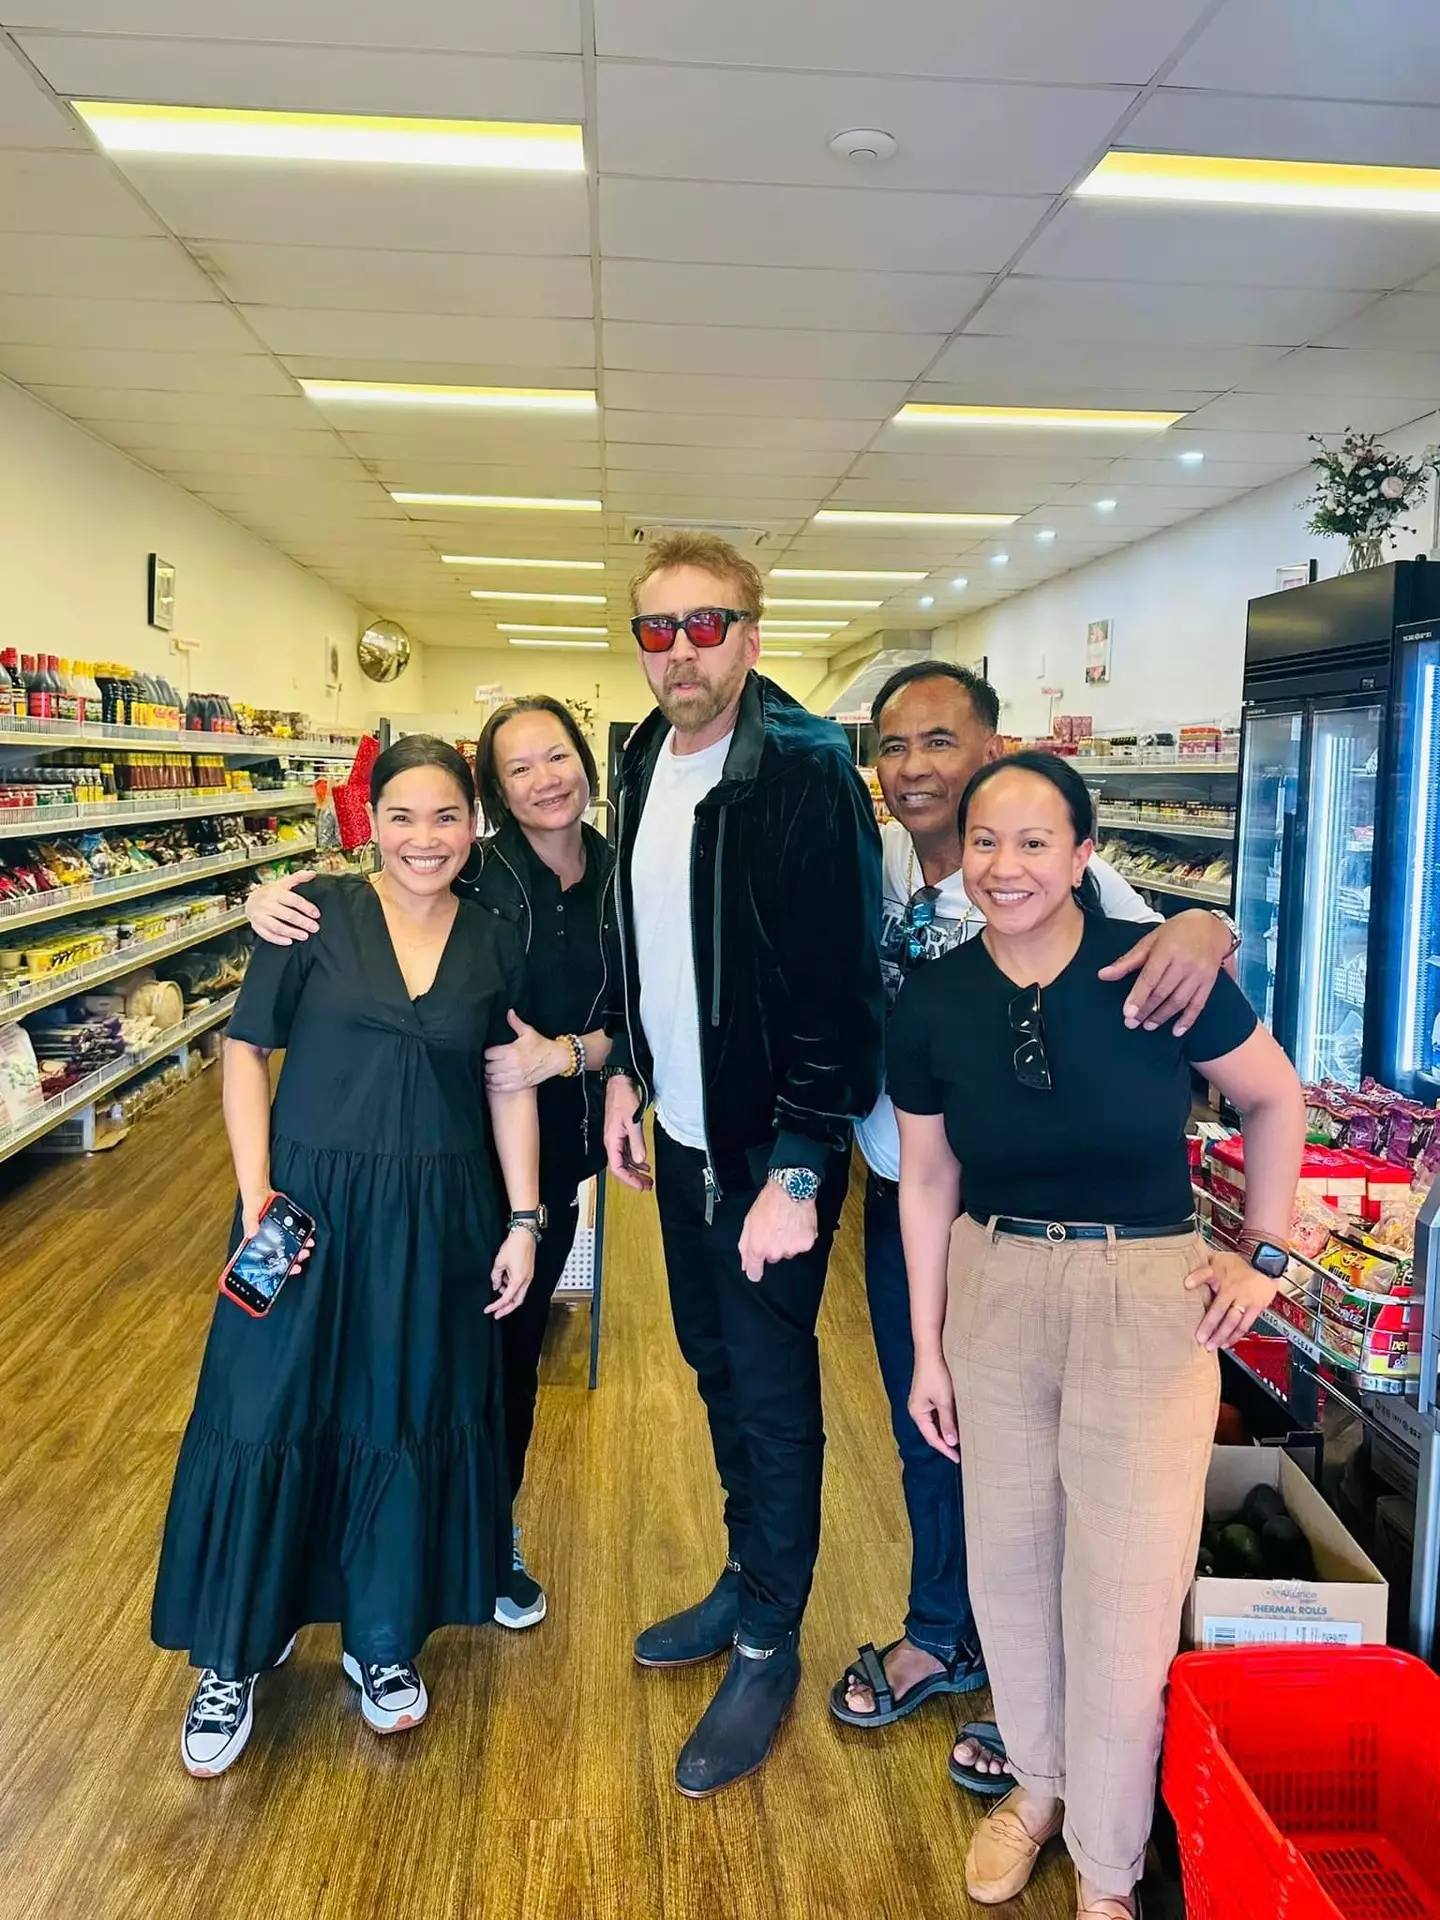 Nicolas Cage posed for a picture with the staff at the shop.